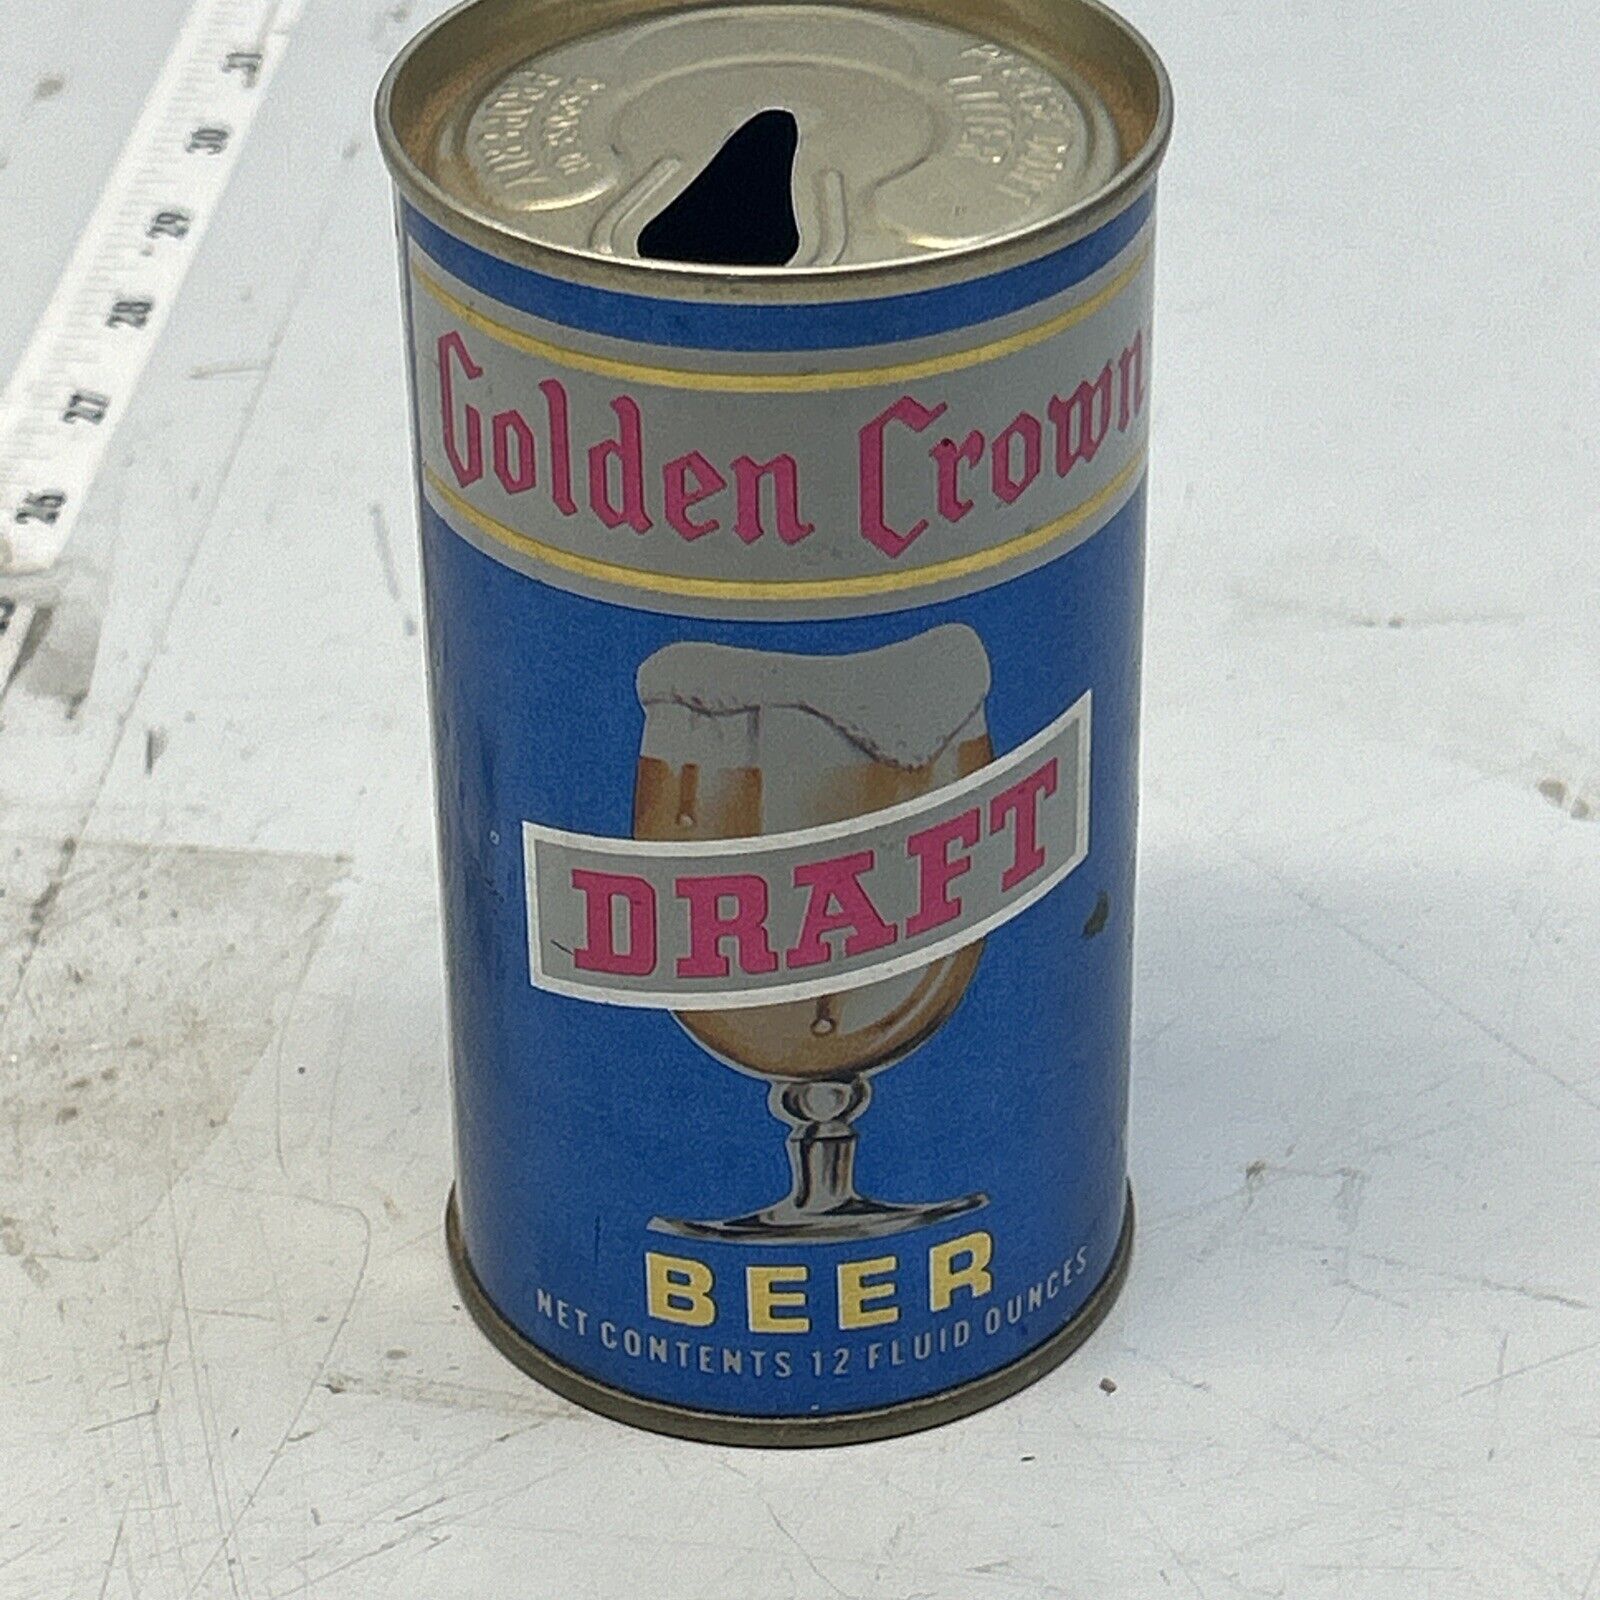 Opened Golden Crown 12 Oz. Pull Tab Beer Can Maier Brewing Los Angeles, Ca